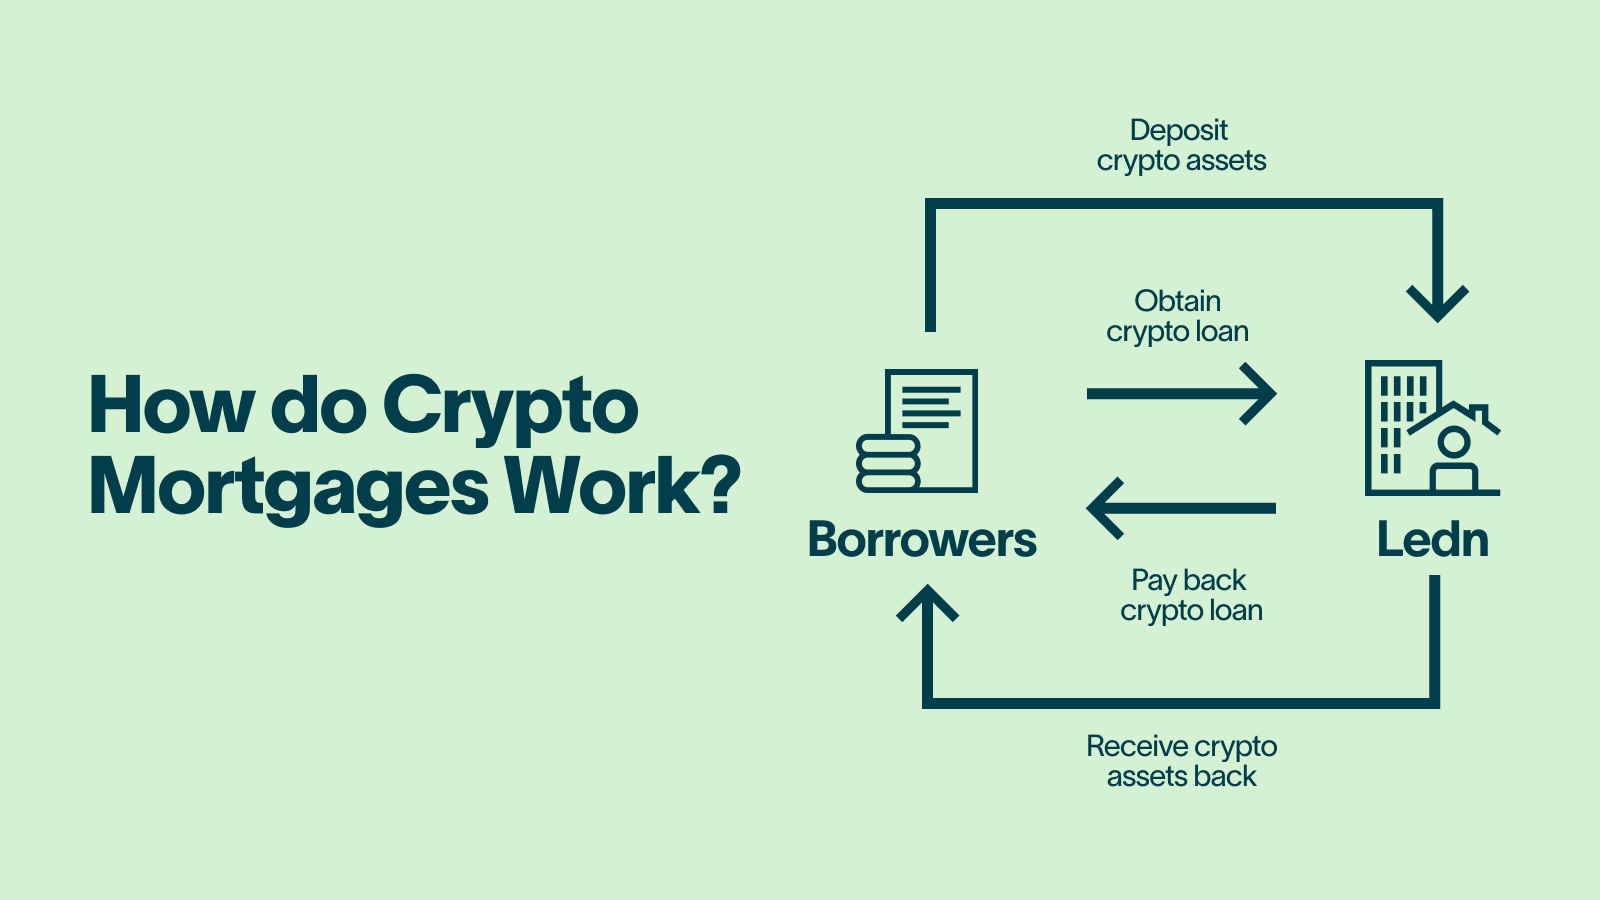 How do Crypto Mortgages Work